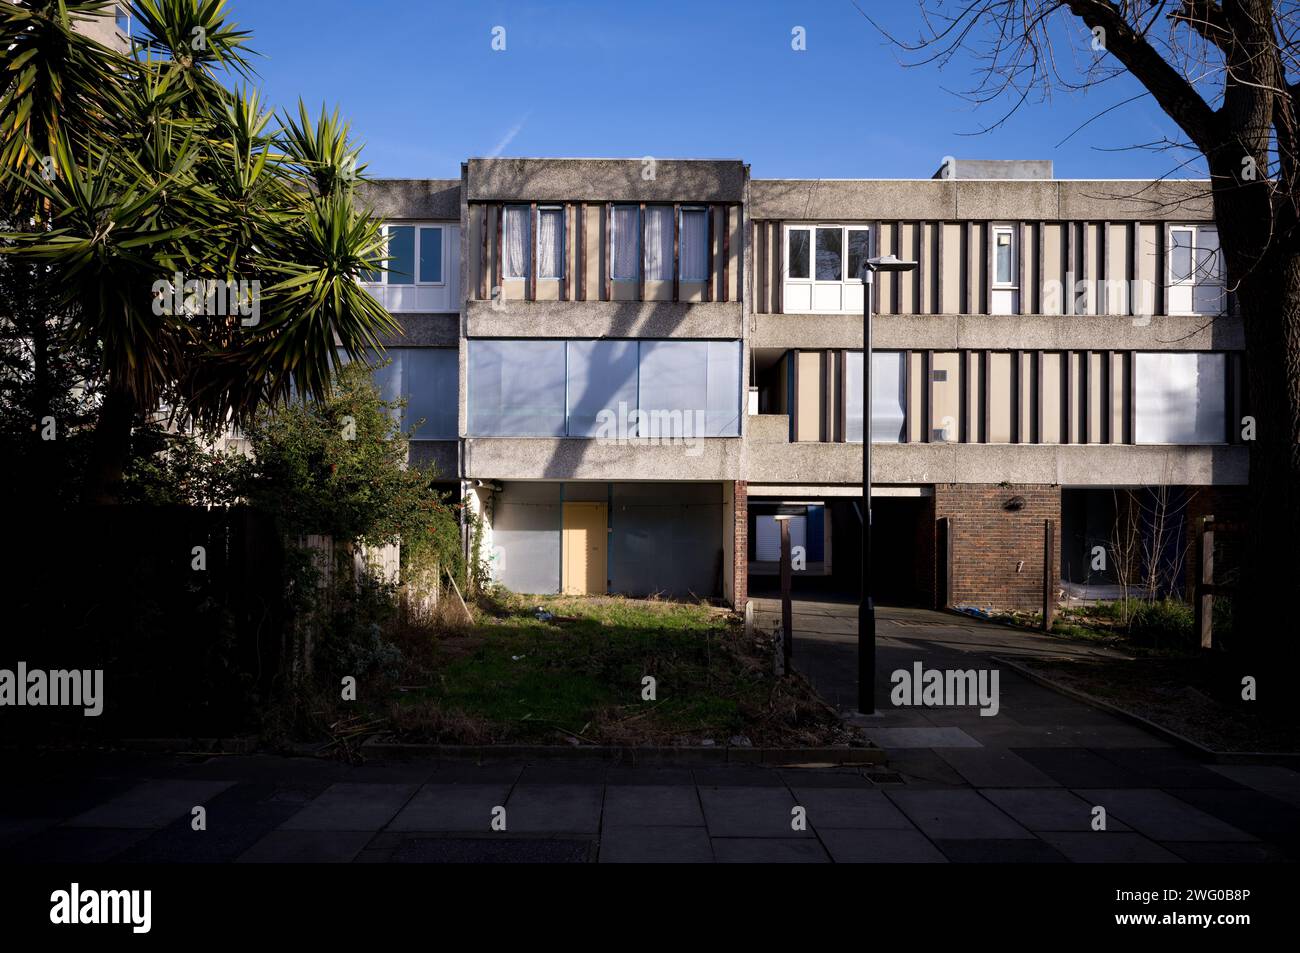 Housing on Hinksey Path SE2, part of the Lesnes Estate in Thamesmead, a brutalist estate built in 1967, due to be demolished and redeveloped. Stock Photo